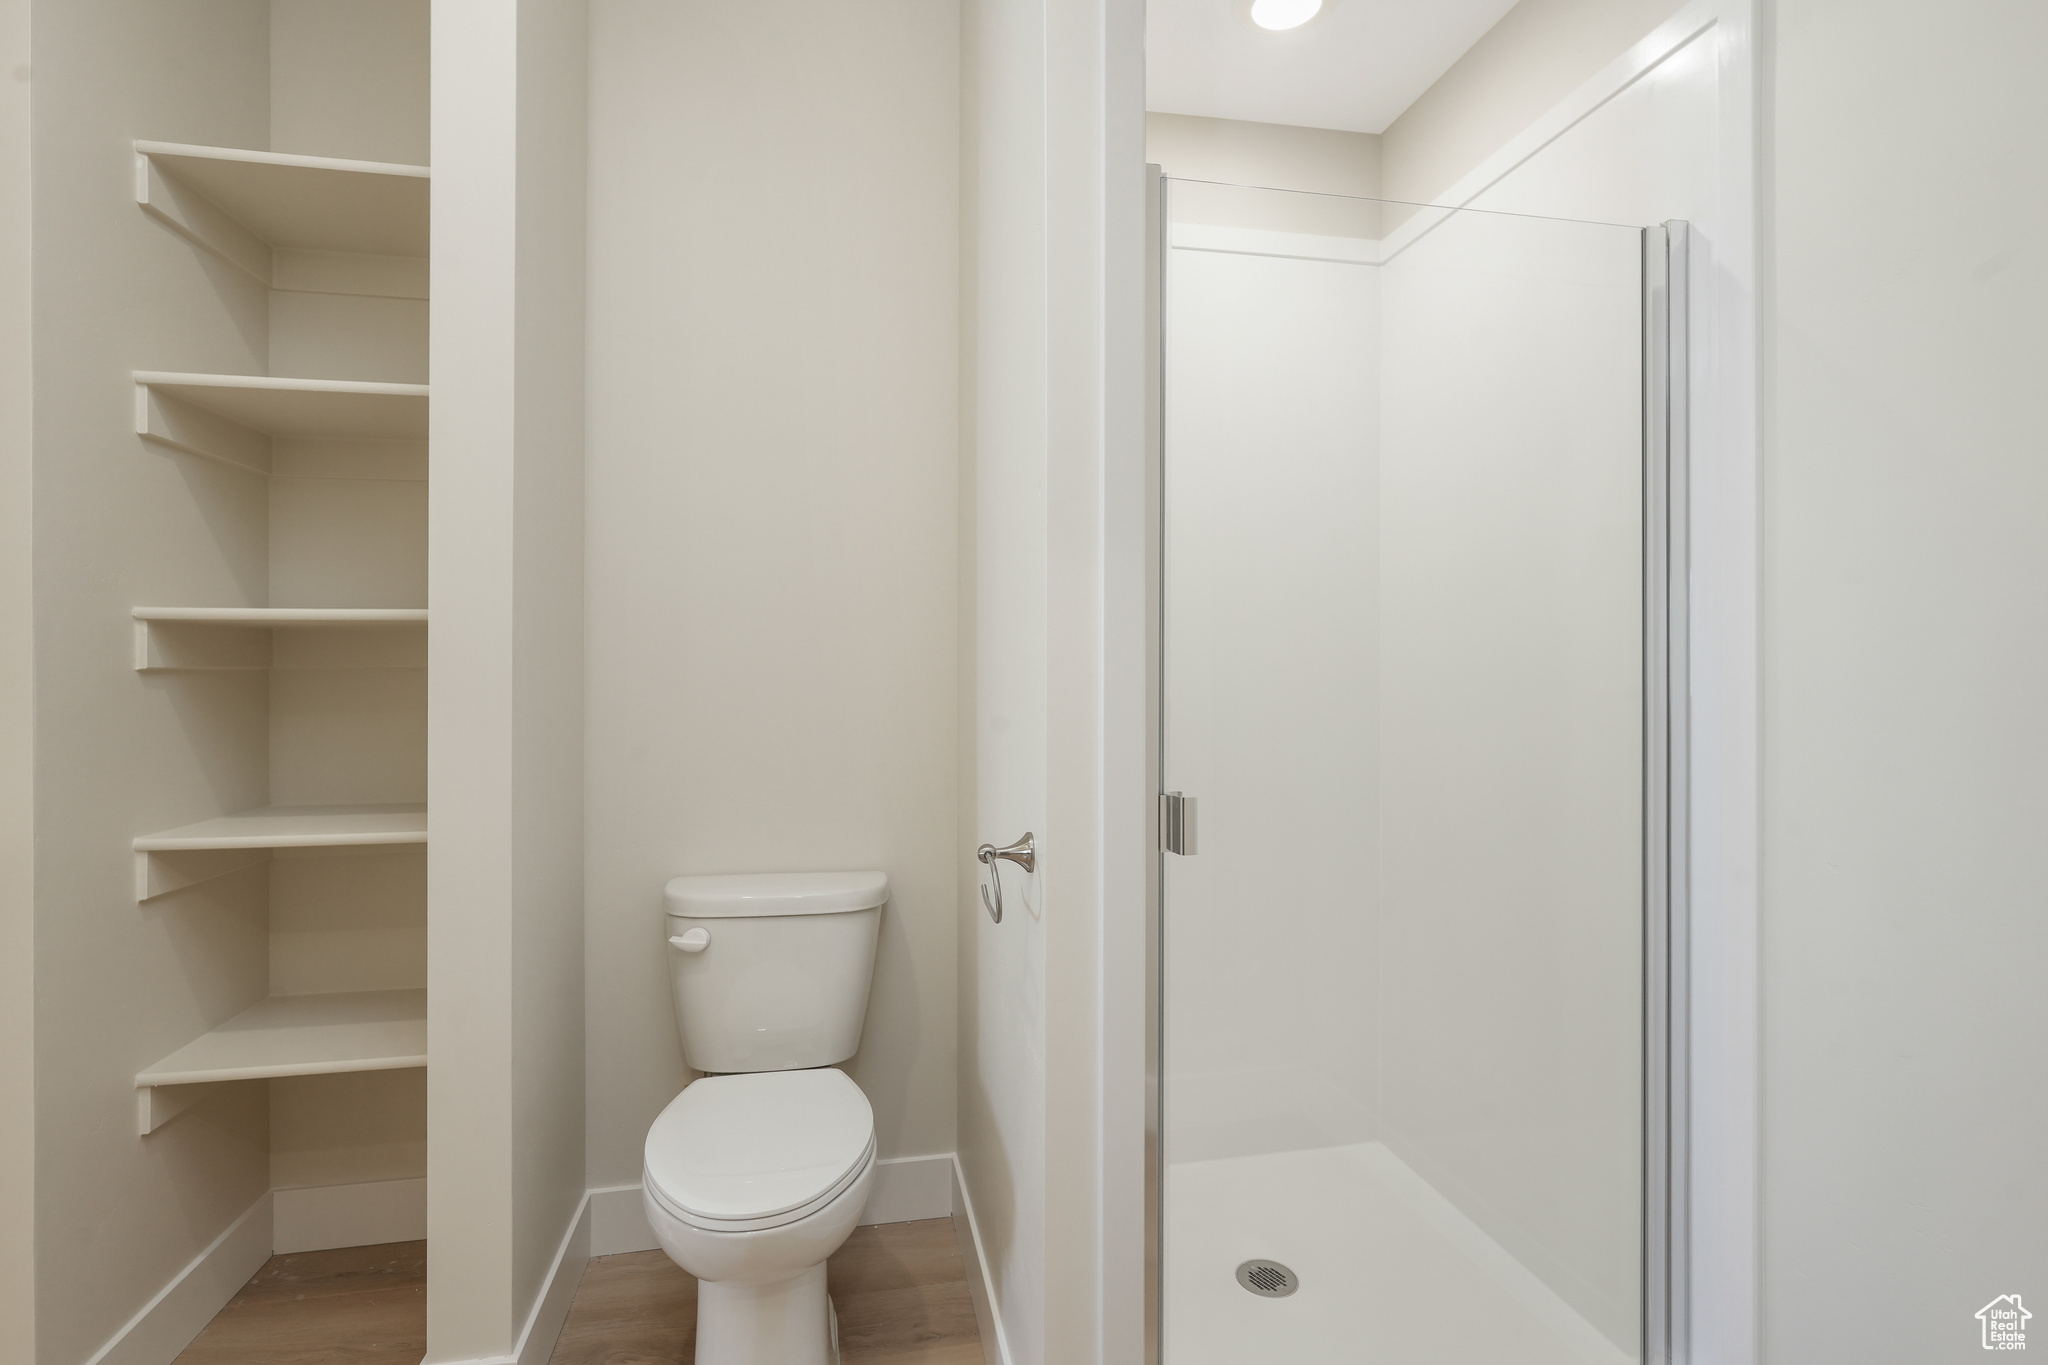 Bathroom with hardwood / wood-style flooring, toilet, and walk in shower